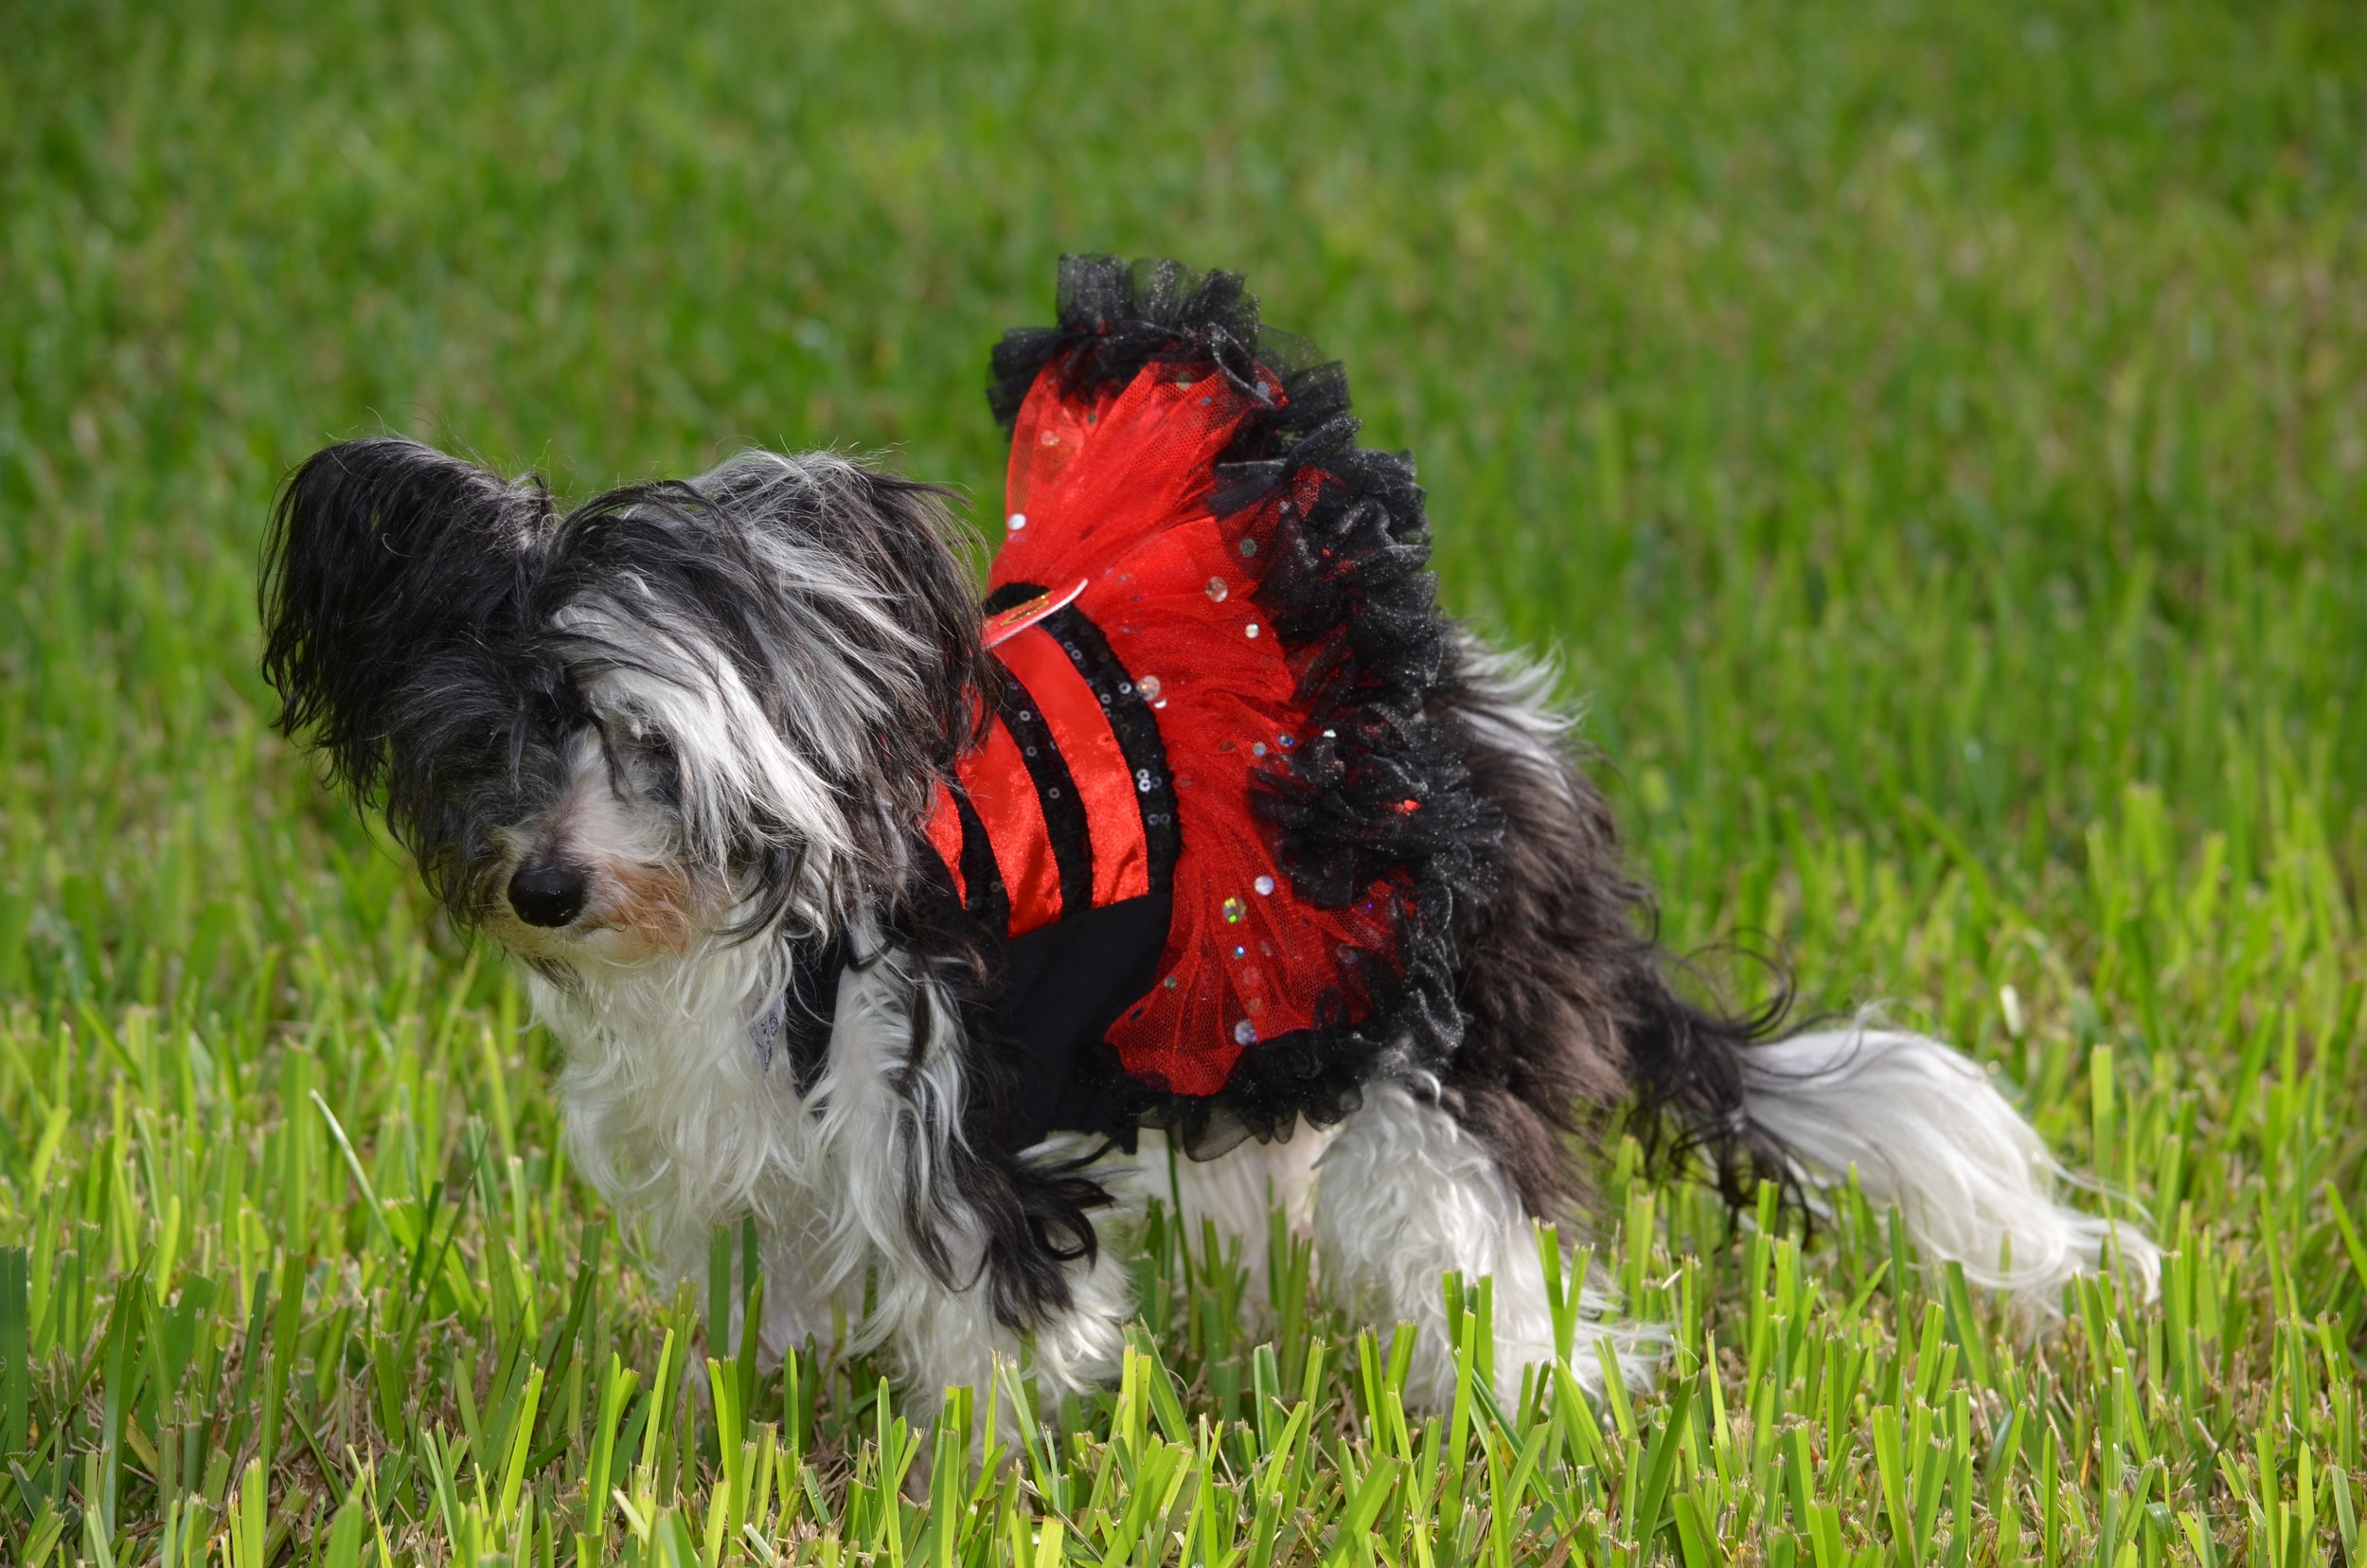 Scarlette, a rare Chinese Crested Powder Puff, is a rescue dog -- and mom and dad Lois and Steve Scheiber believe she is about 15 years old. This year, Scarlette is dressed as a lovely ladybug.